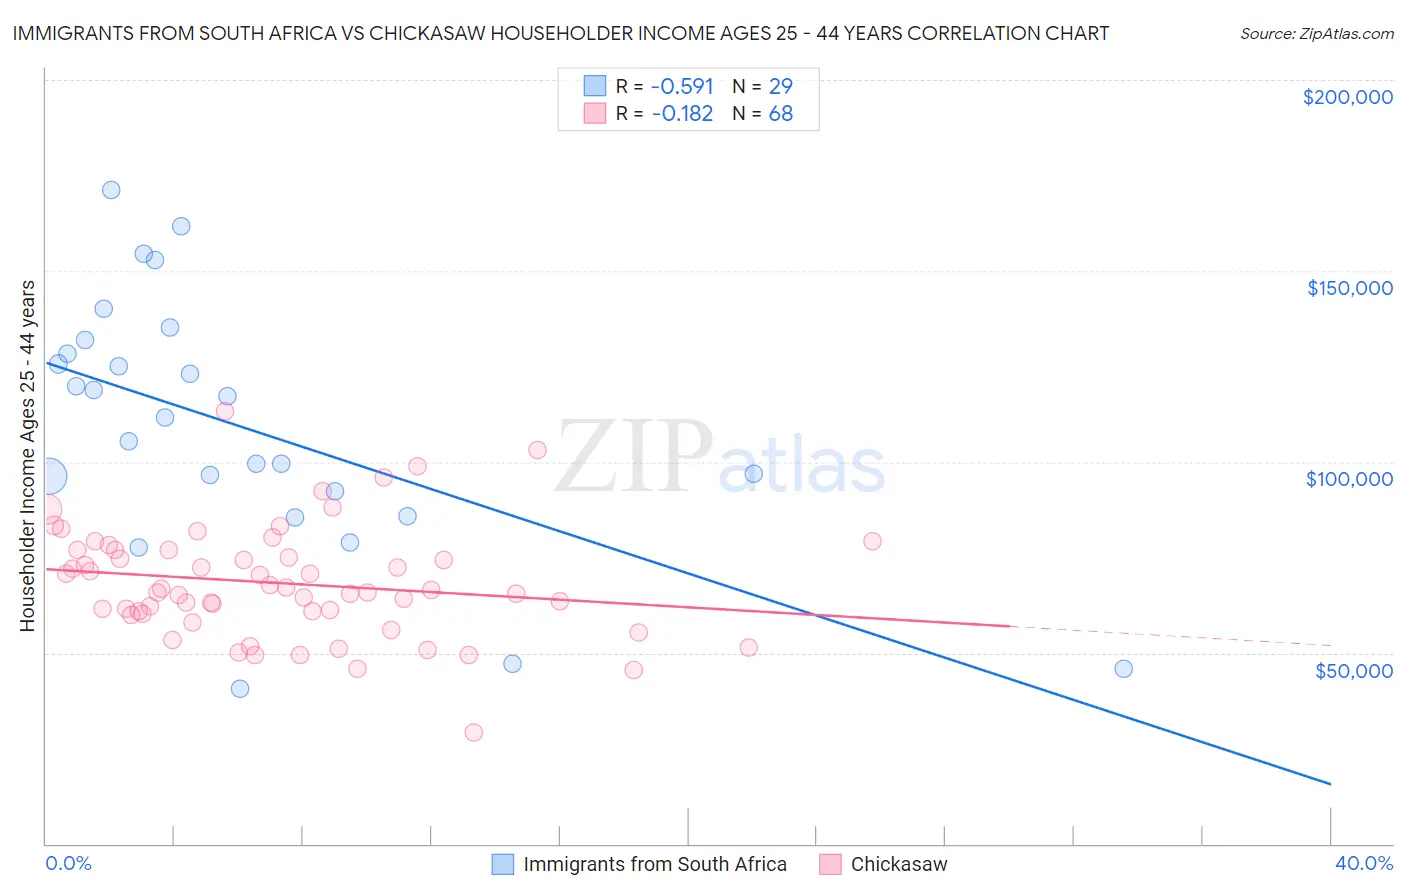 Immigrants from South Africa vs Chickasaw Householder Income Ages 25 - 44 years